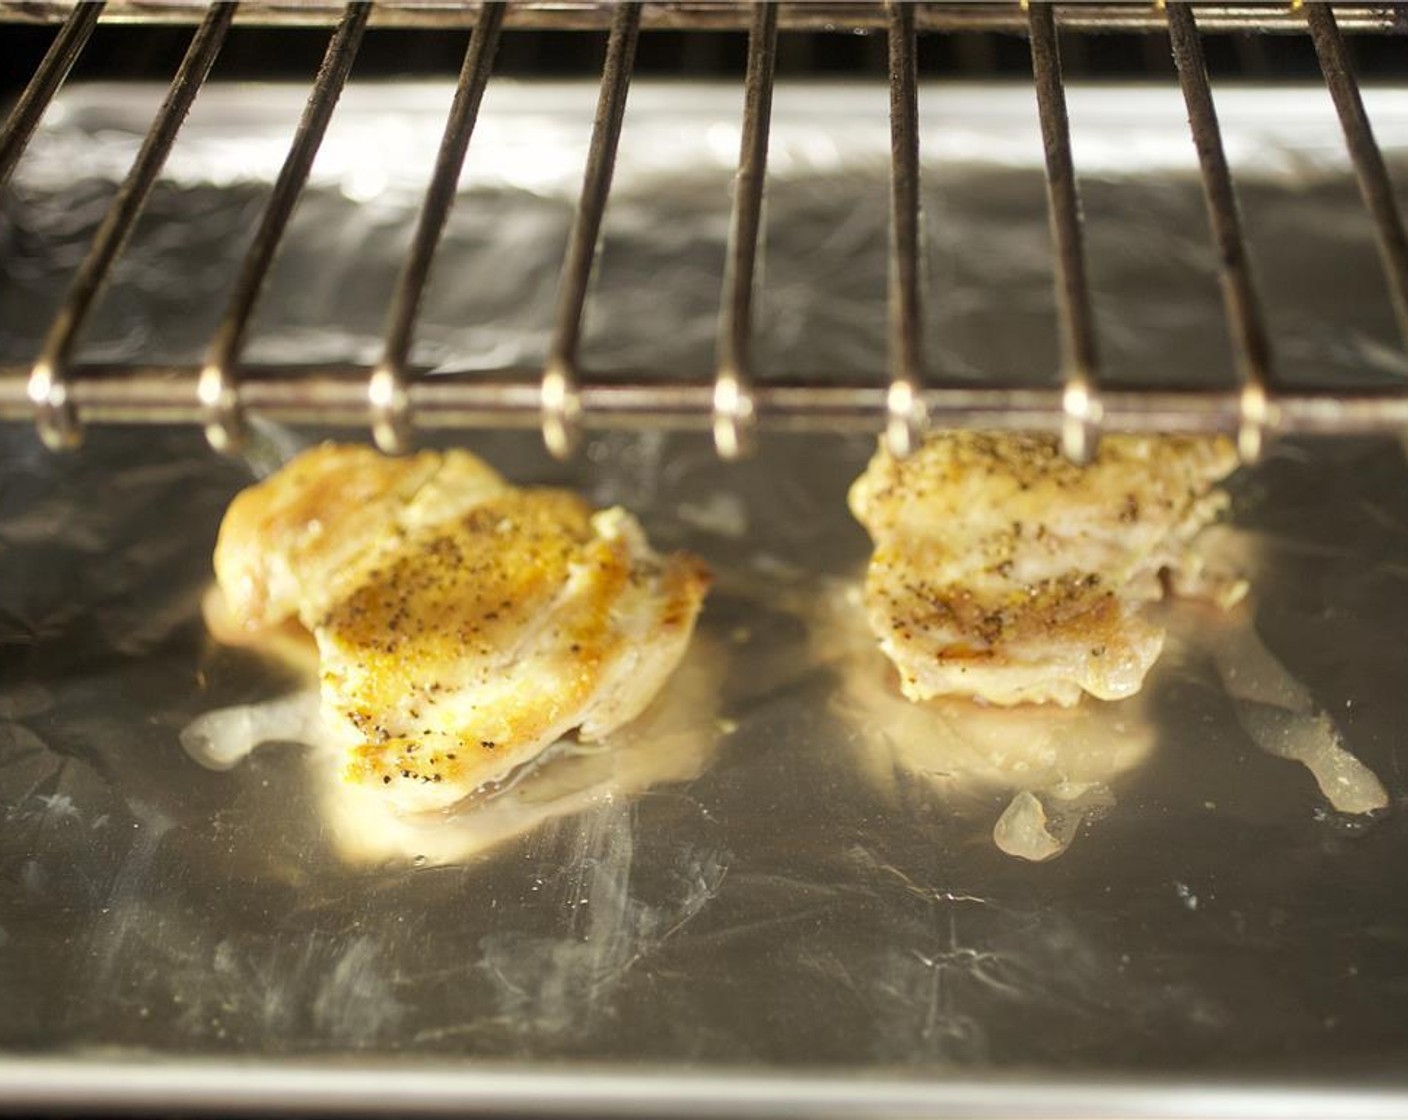 step 7 Heat a large saute pan over medium-high heat and add 1 tablespoon of olive oil. Season the Chicken Thighs (2) with 1/4 teaspoon each of salt and pepper. When the oil is hot, add the chicken and sear for 4 to 5 minutes on each side or until cooked through.